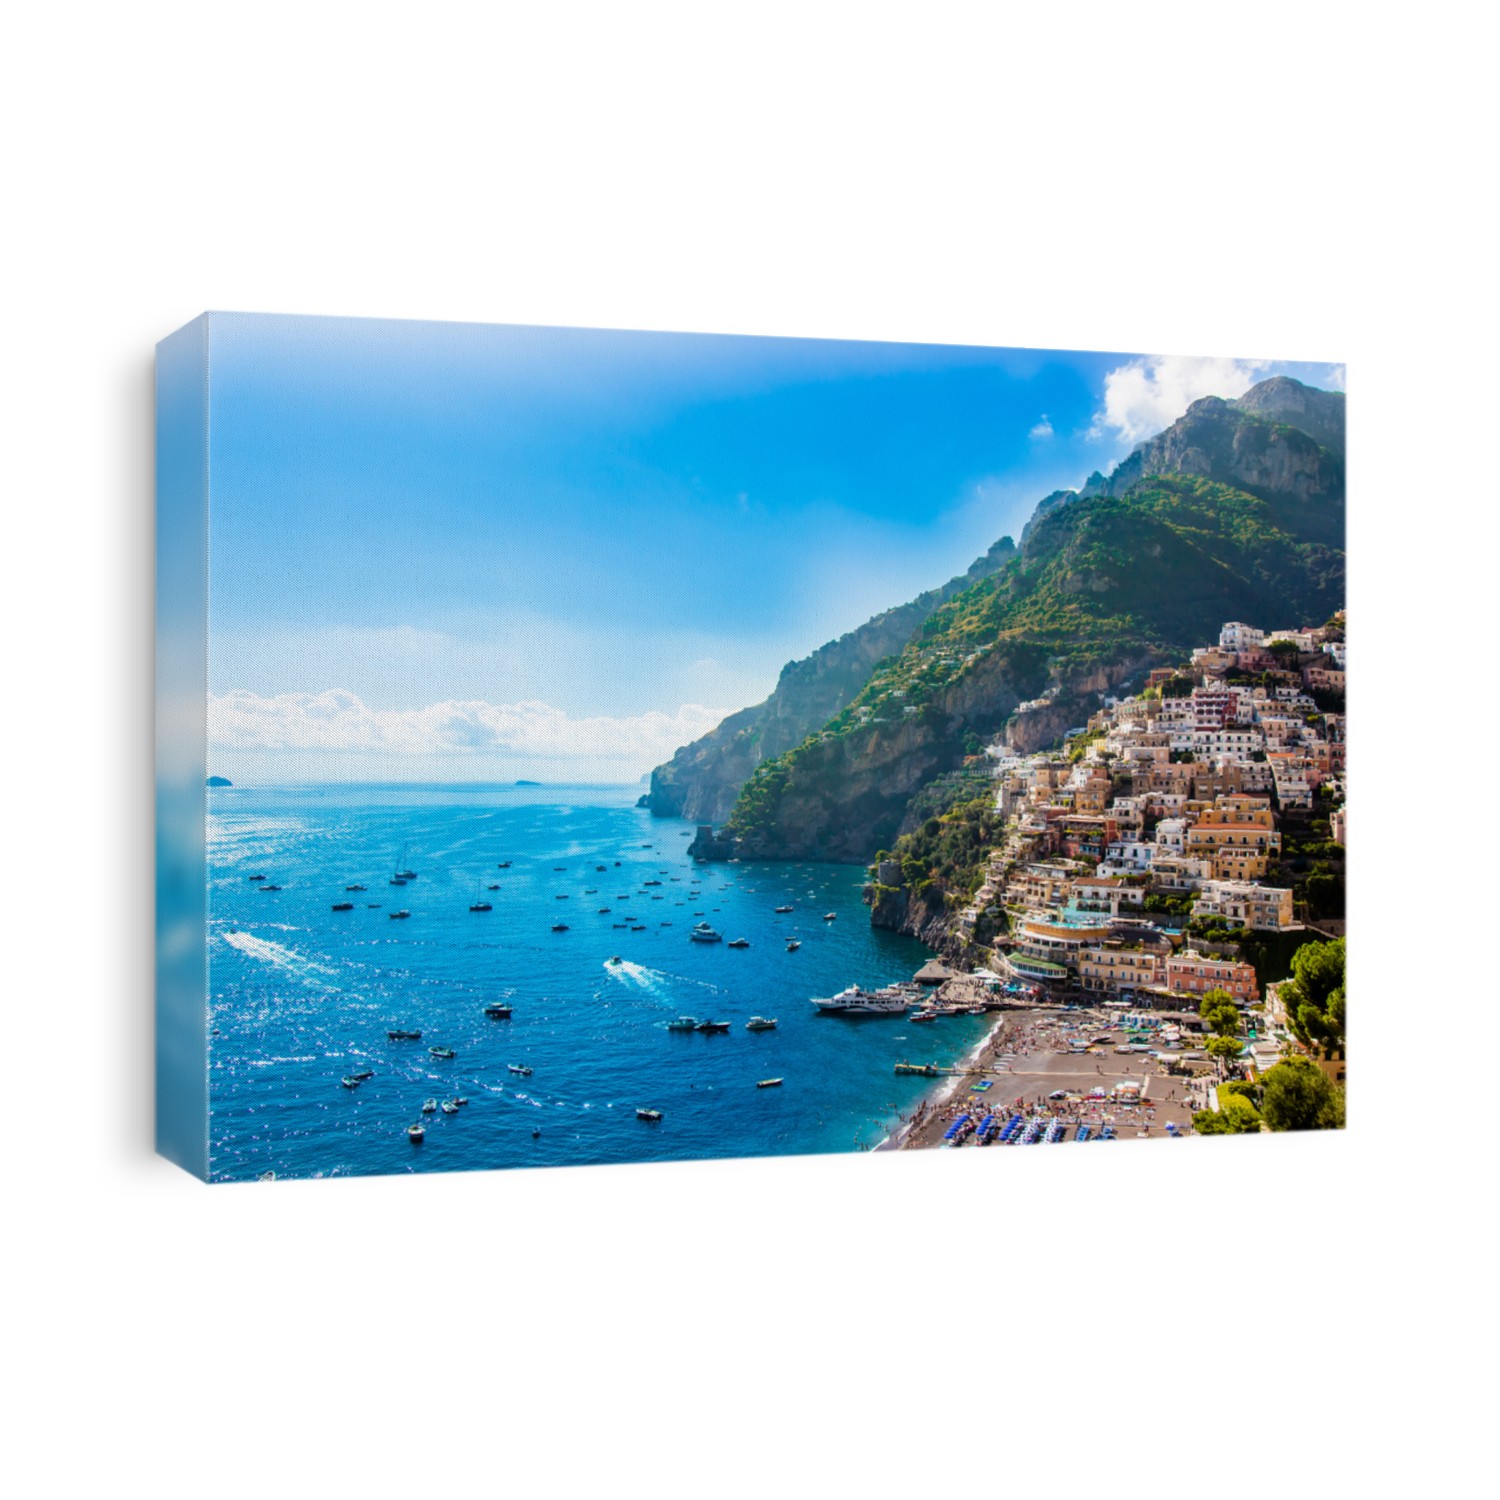 Panoramic view of Positano, famous village in the Amalfi Coast, Italy